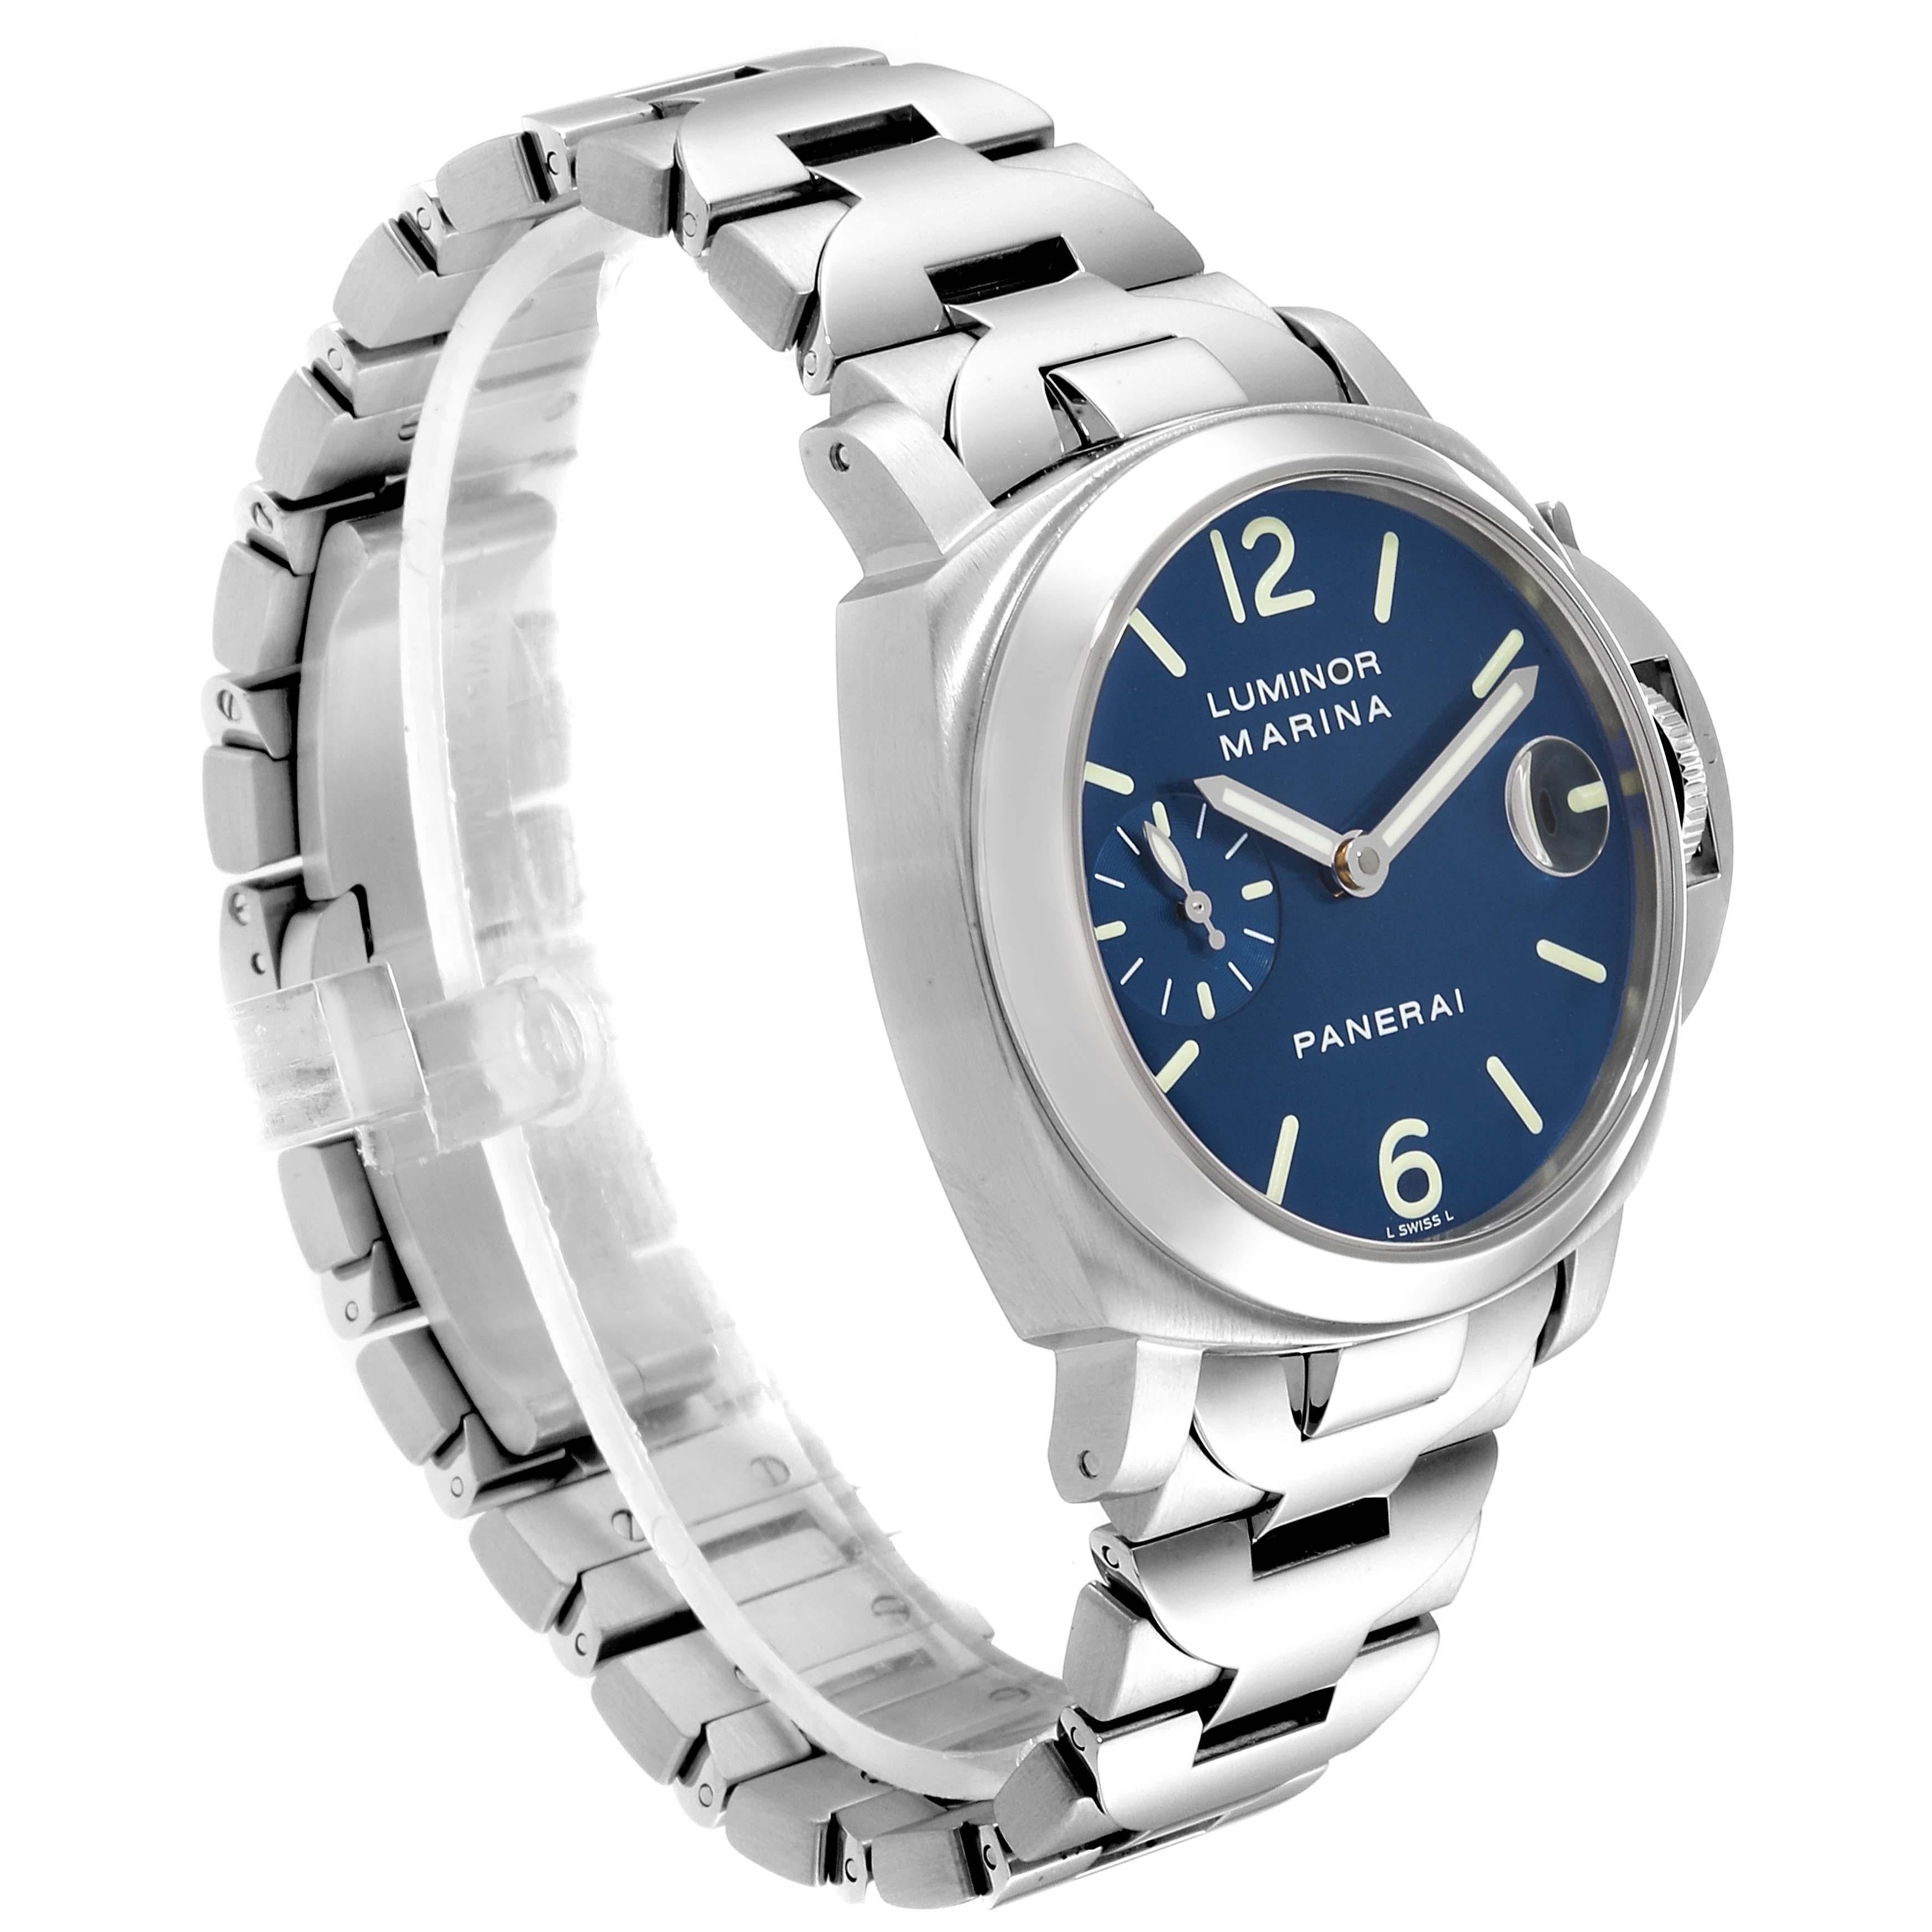 Panerai Luminor Marina Blue Dial Men's Watch PAM00120 Box Papers In Excellent Condition For Sale In Atlanta, GA